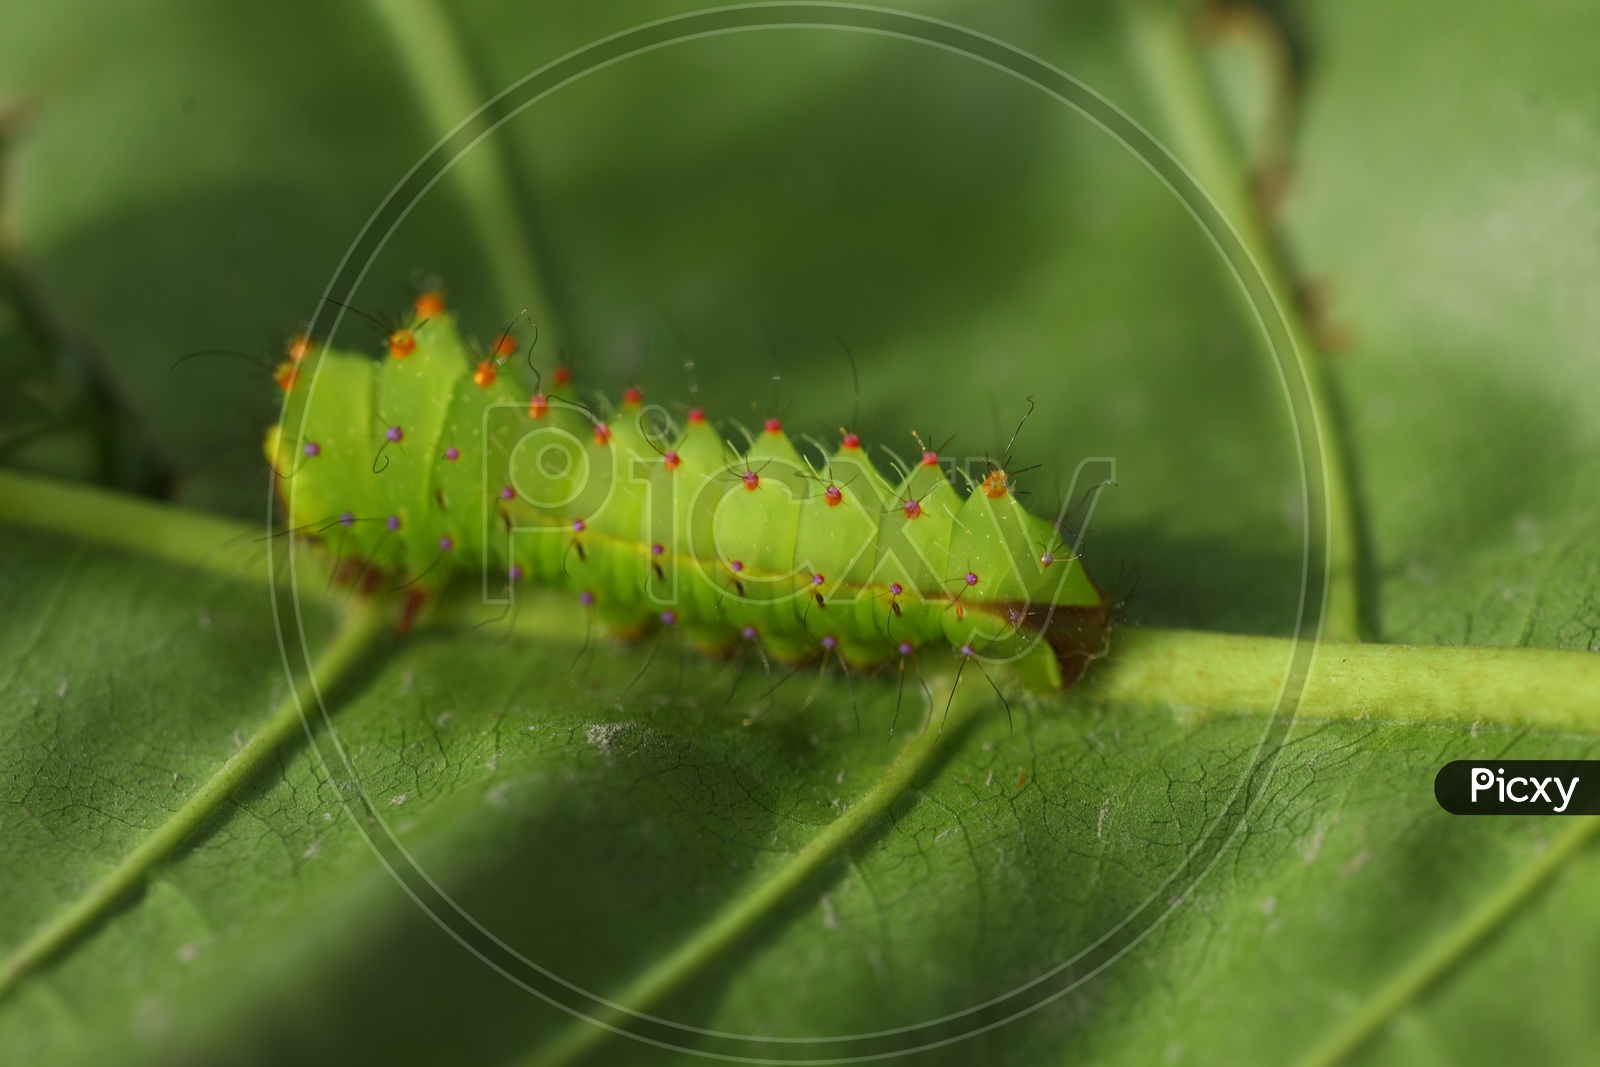 A Caterpillar moving on the leaf